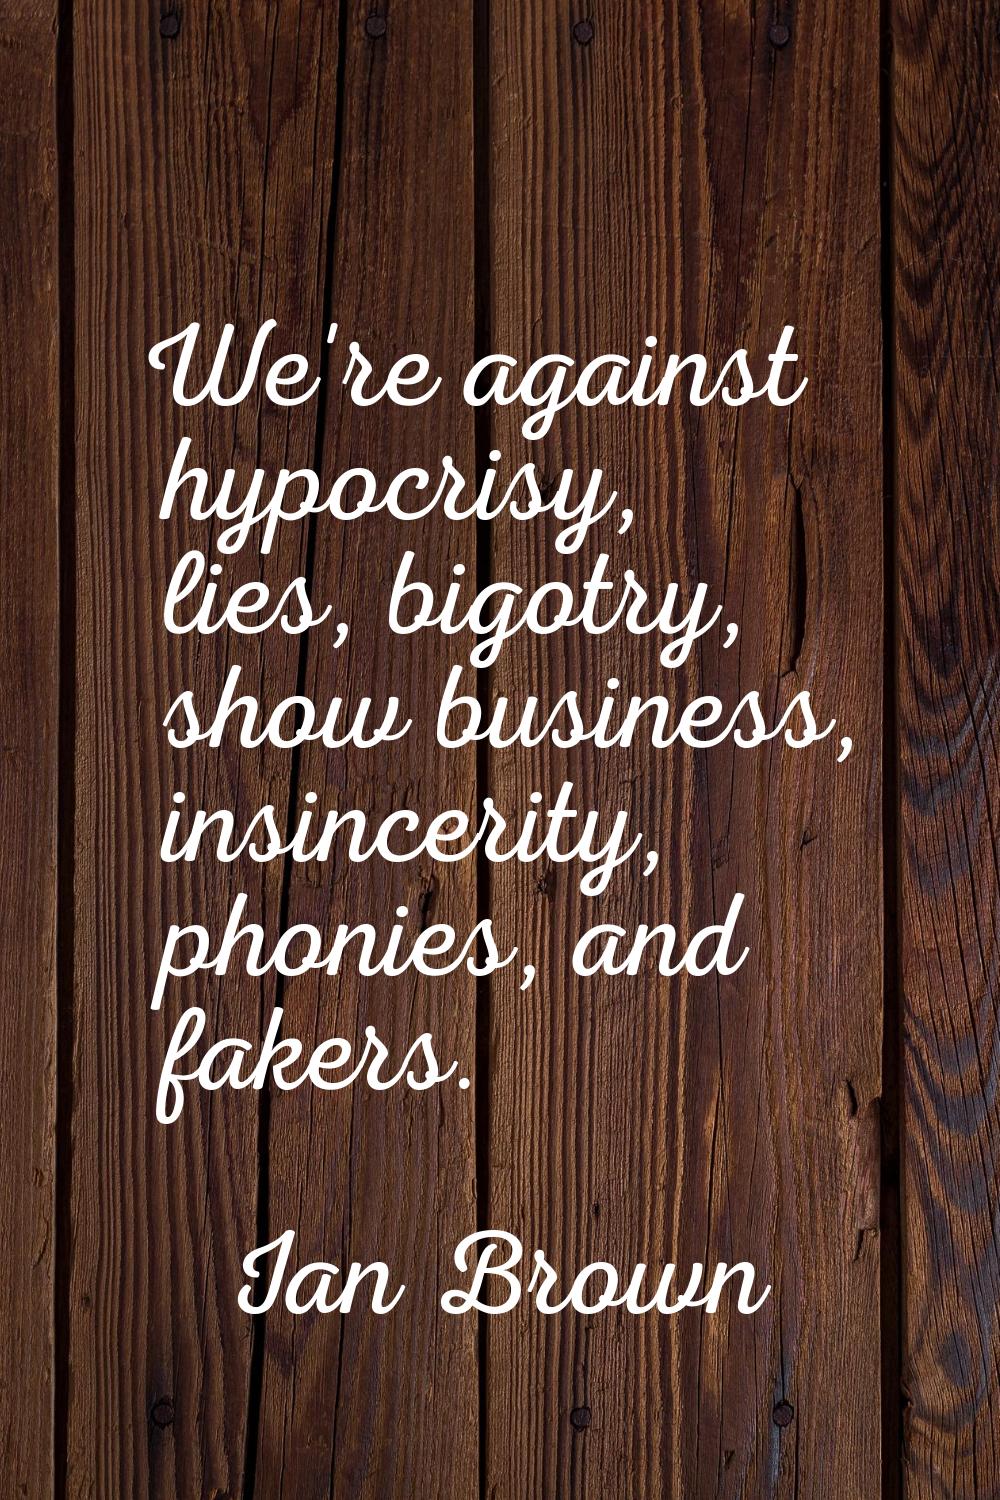 We're against hypocrisy, lies, bigotry, show business, insincerity, phonies, and fakers.